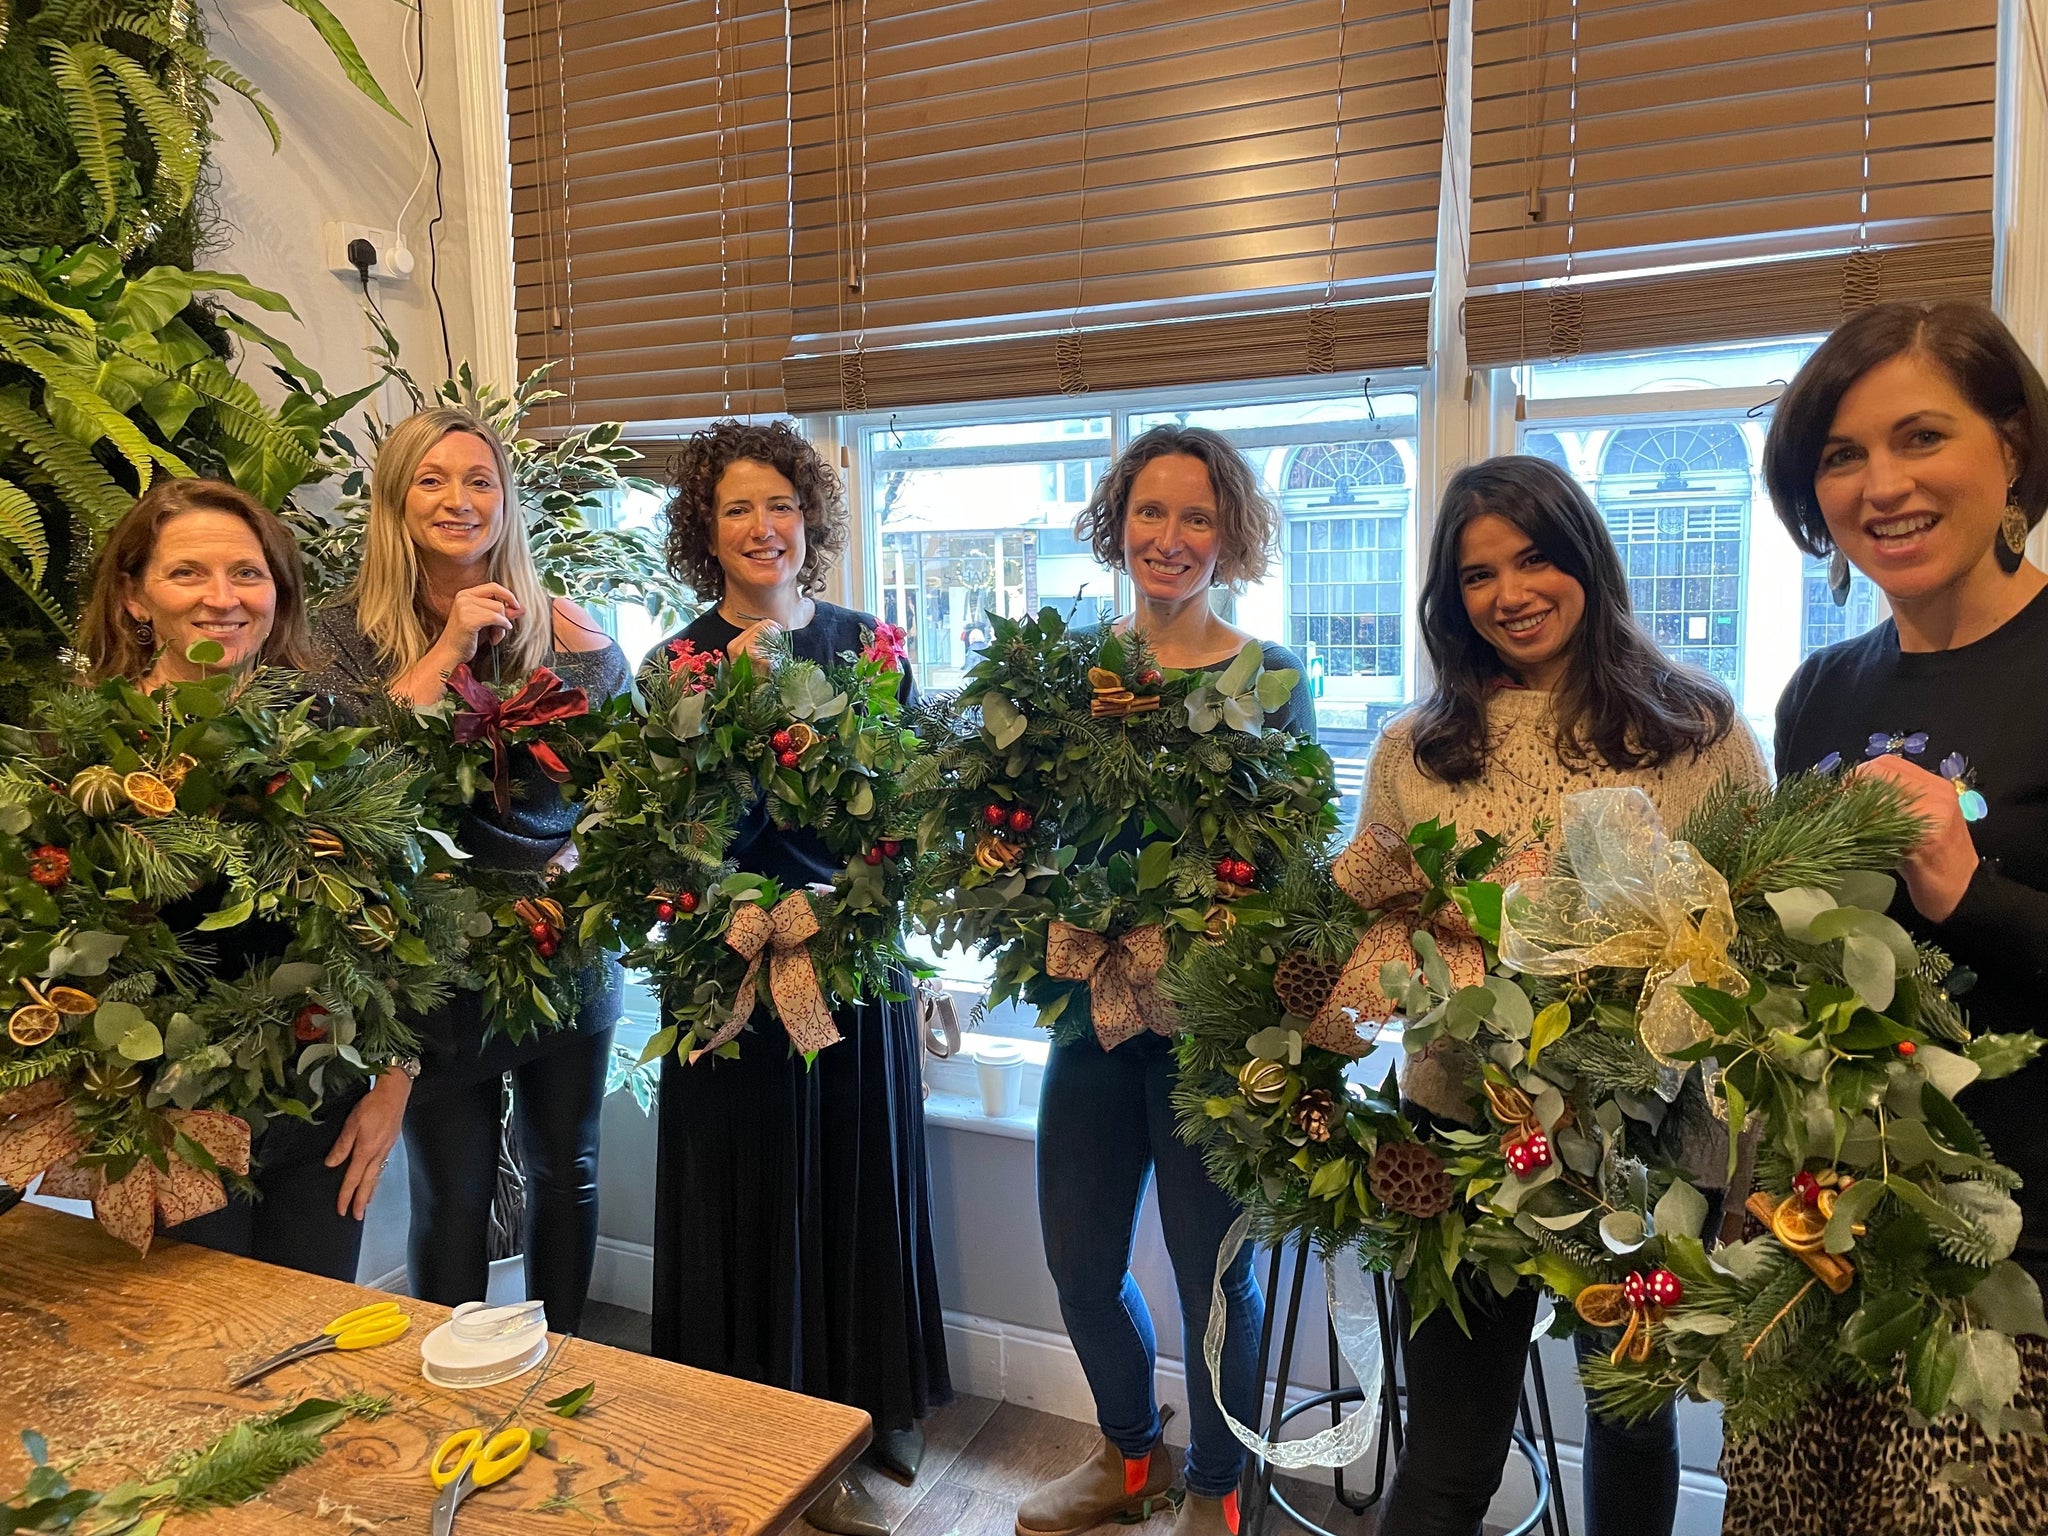 Christmas Wreath Workshop – Saturday 9th December, Starting @ 11am (£75 per person) 2.5 hours